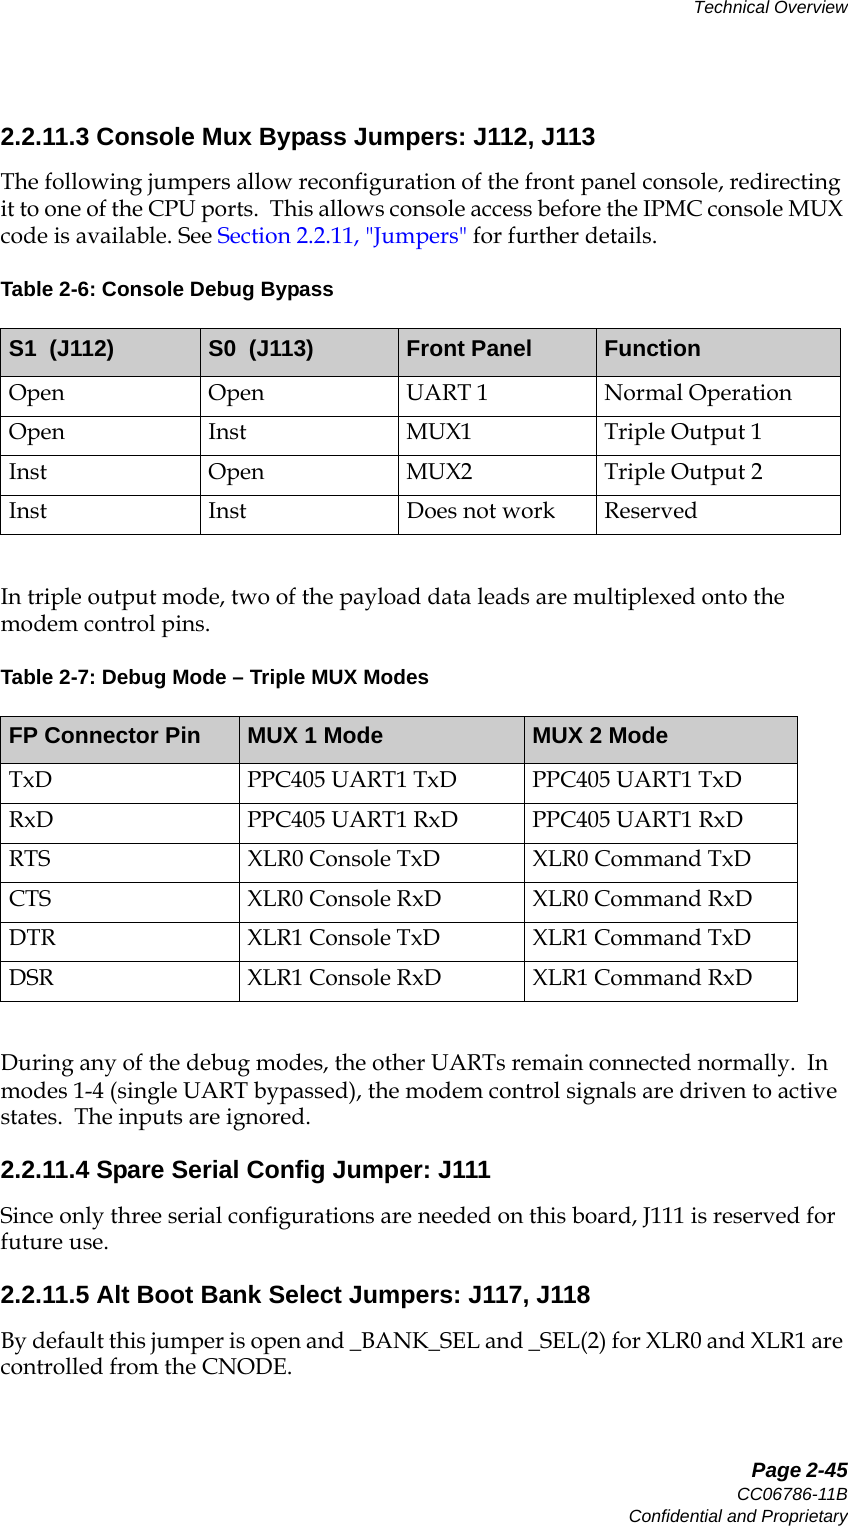   Page 2-45CC06786-11BConfidential and ProprietaryTechnical Overview14ABABPreliminary2.2.11.3 Console Mux Bypass Jumpers: J112, J113The following jumpers allow reconfiguration of the front panel console, redirecting it to one of the CPU ports.  This allows console access before the IPMC console MUX code is available. See Section2.2.11, &quot;Jumpers&quot; for further details. In triple output mode, two of the payload data leads are multiplexed onto the modem control pins.During any of the debug modes, the other UARTs remain connected normally.  In modes 1-4 (single UART bypassed), the modem control signals are driven to active states.  The inputs are ignored. 2.2.11.4 Spare Serial Config Jumper: J111Since only three serial configurations are needed on this board, J111 is reserved for future use.2.2.11.5 Alt Boot Bank Select Jumpers: J117, J118By default this jumper is open and _BANK_SEL and _SEL(2) for XLR0 and XLR1 are controlled from the CNODE.Table 2-6: Console Debug BypassS1  (J112) S0  (J113) Front Panel FunctionOpen Open UART 1 Normal OperationOpen Inst MUX1 Triple Output 1Inst Open MUX2 Triple Output 2Inst Inst Does not work ReservedTable 2-7: Debug Mode – Triple MUX ModesFP Connector Pin MUX 1 Mode MUX 2 ModeTxD PPC405 UART1 TxD PPC405 UART1 TxDRxD PPC405 UART1 RxD PPC405 UART1 RxDRTS XLR0 Console TxD XLR0 Command TxDCTS XLR0 Console RxD XLR0 Command RxDDTR XLR1 Console TxD XLR1 Command TxDDSR XLR1 Console RxD XLR1 Command RxD